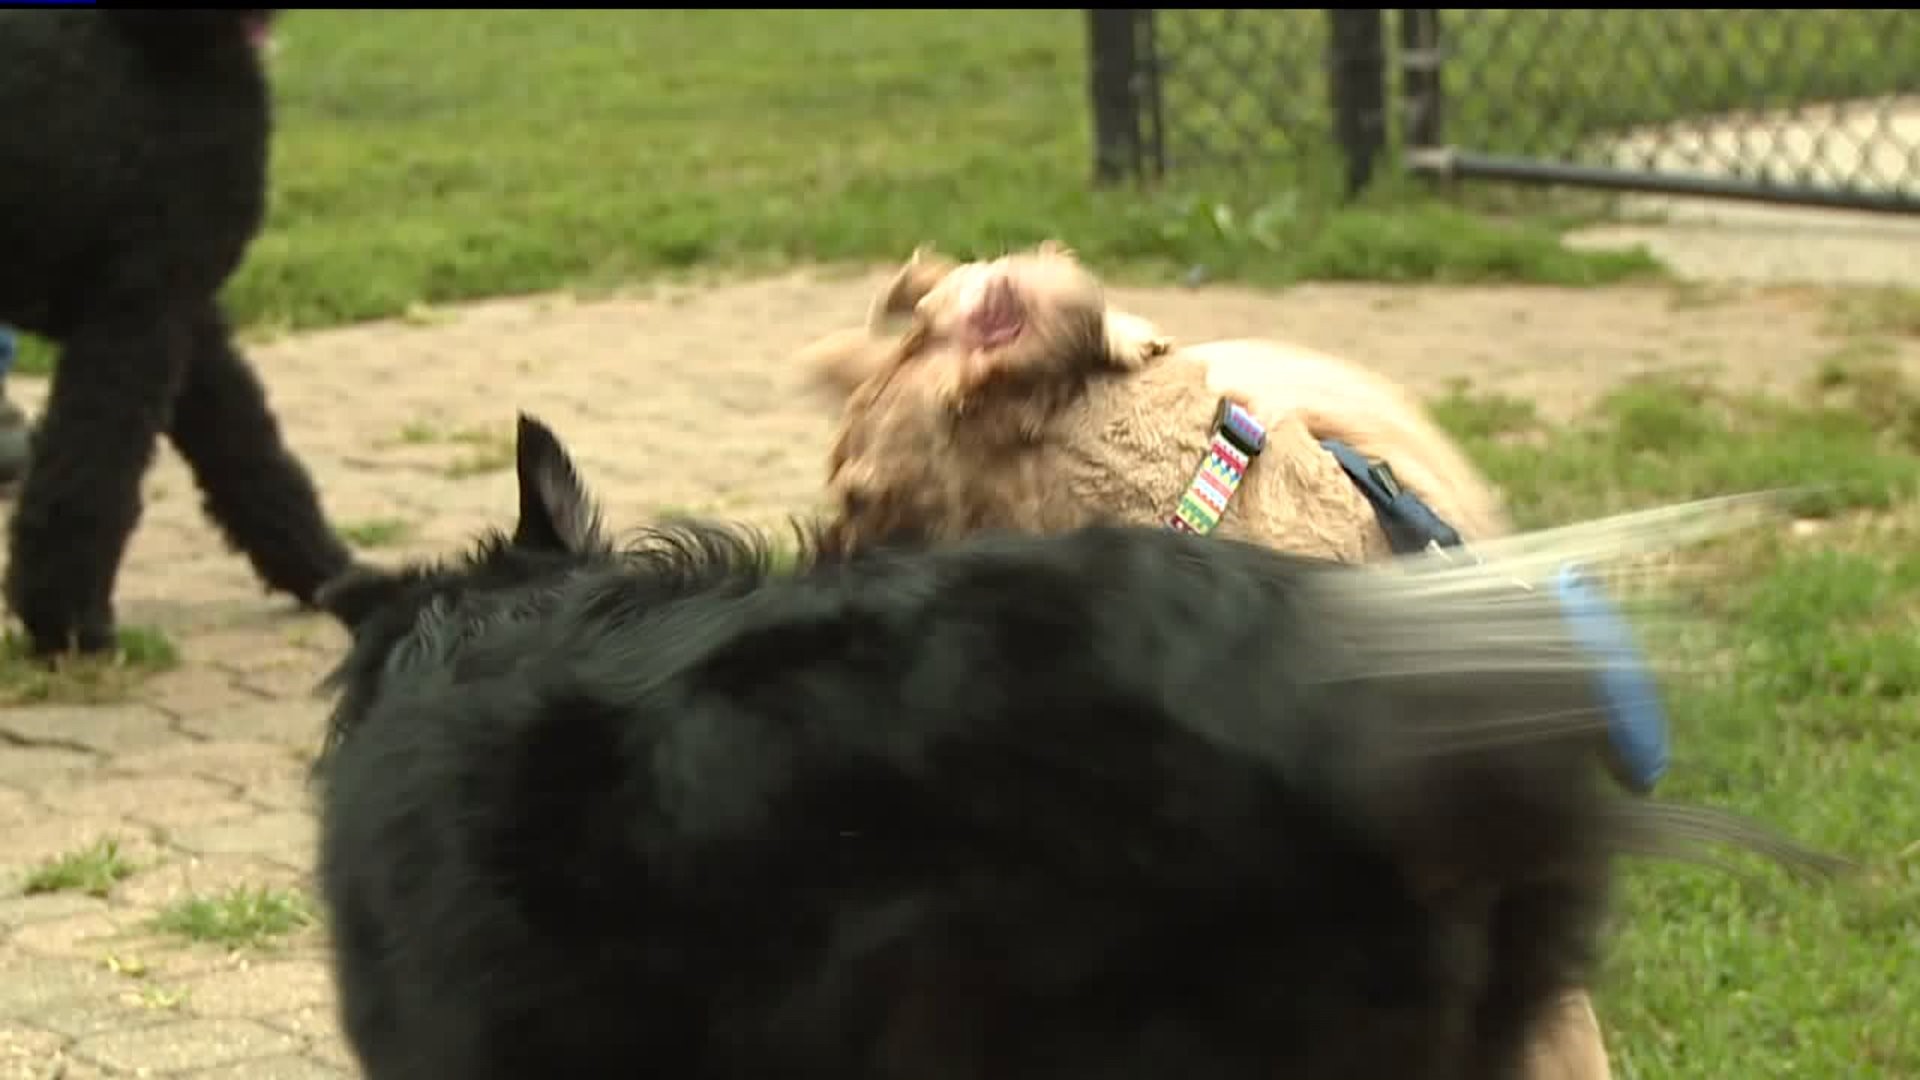 Rock Island Fall Doggie Fest unites dog owners to help renovate park